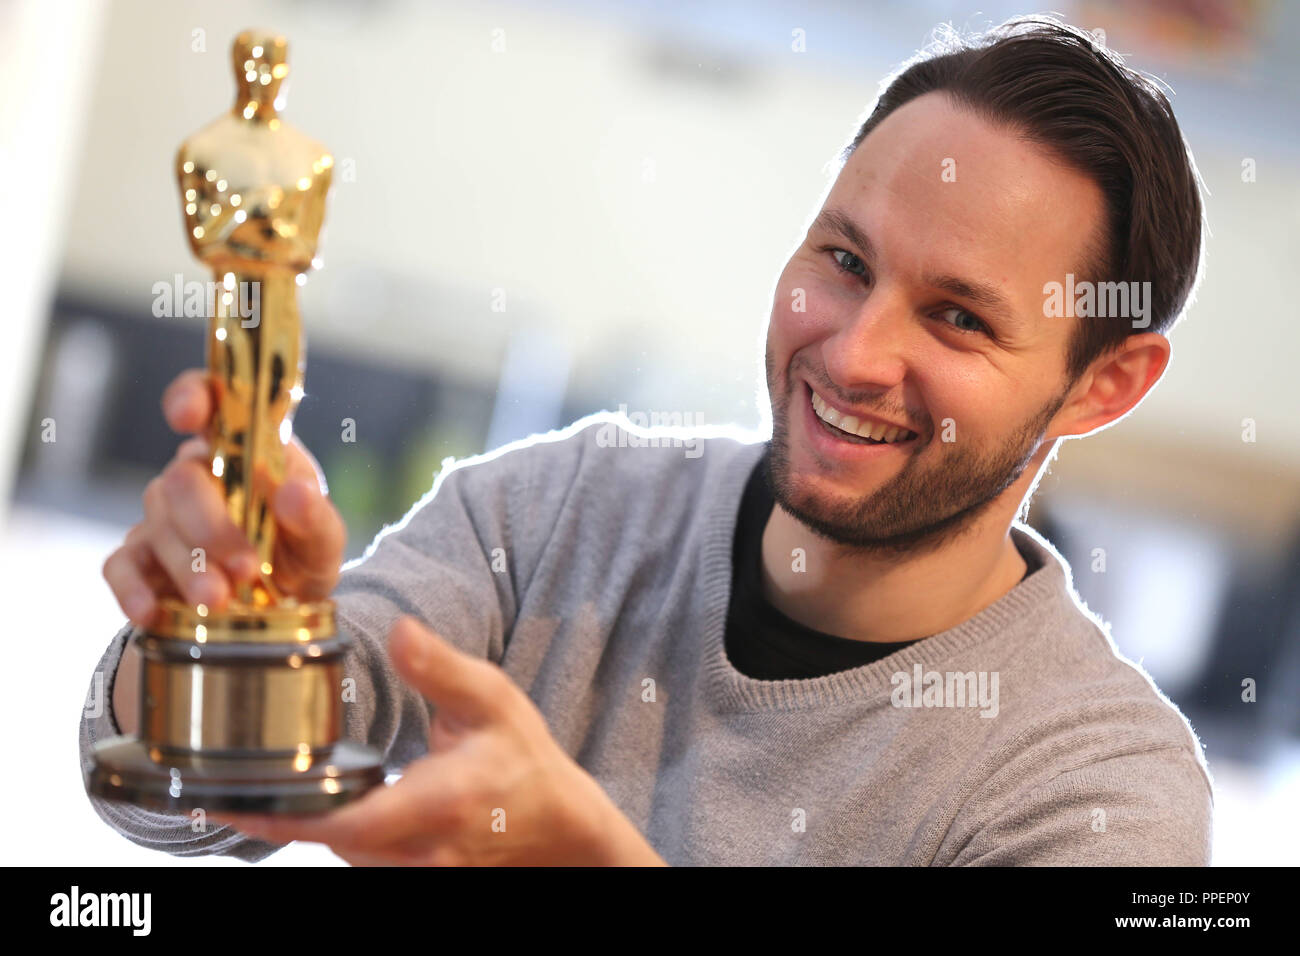 Animator Alexandre Espigares shows his Oscar, which he has received for Best Animated Short Film, at the film company Arri in the attic of a backyard in Schwabing. Stock Photo